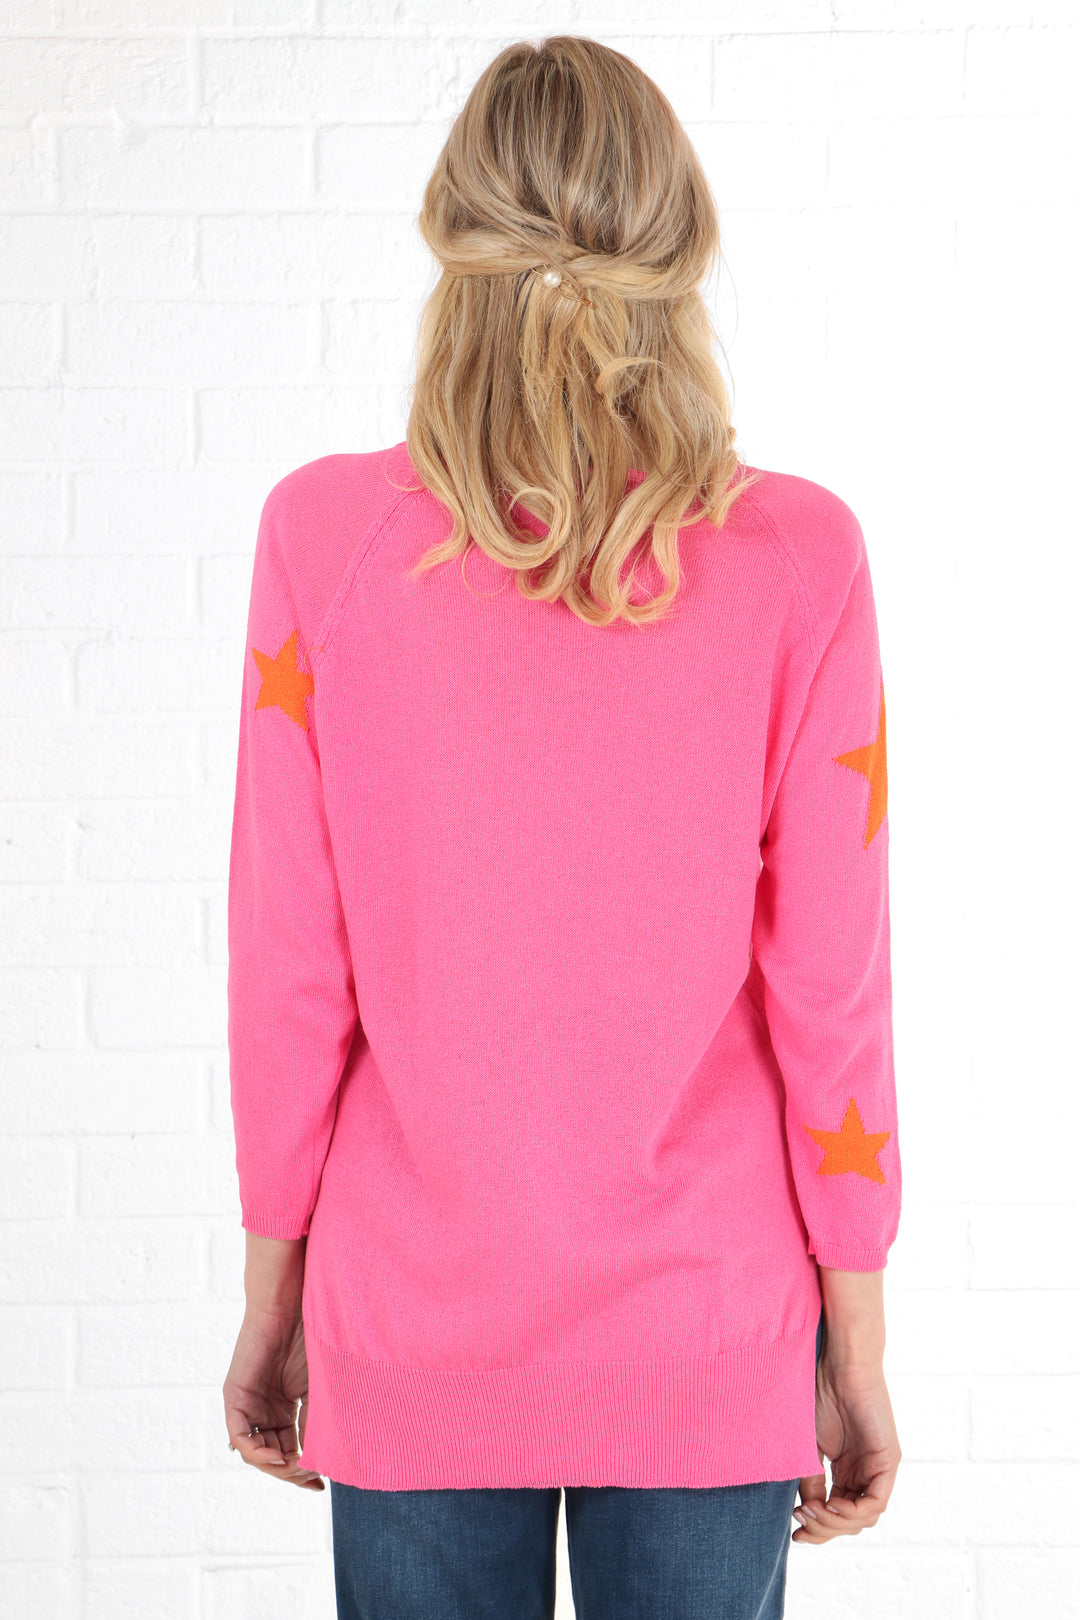 model showing the back of the jumper which has a plain pink back